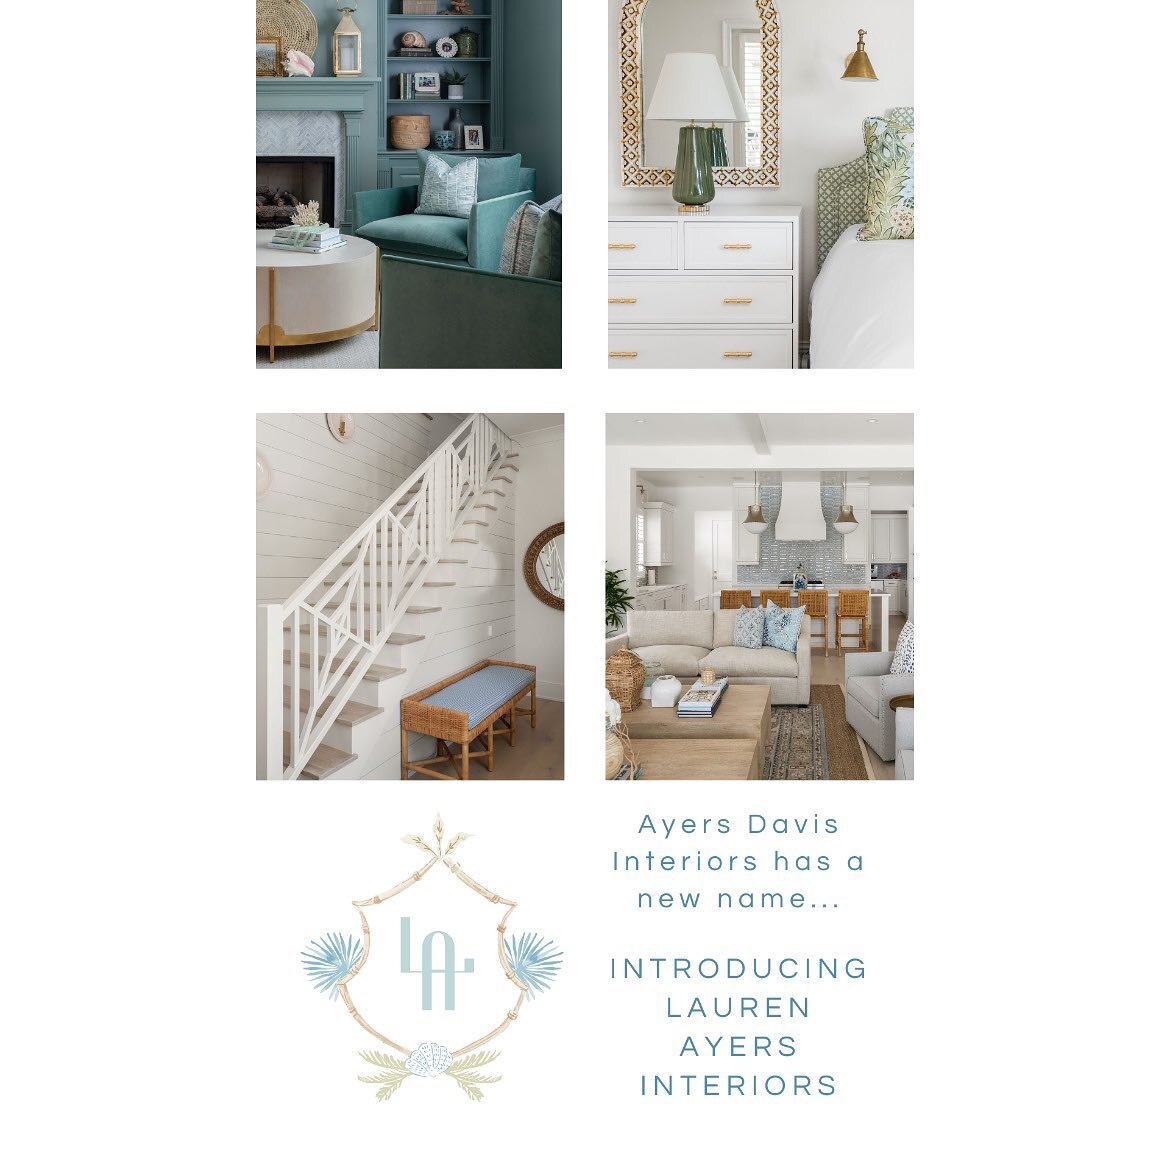 Big news! Ayers Davis Interiors has a new name! Introducing, Lauren Ayers Interiors. Check out our updated website with some great new projects and info added! Website link in bio